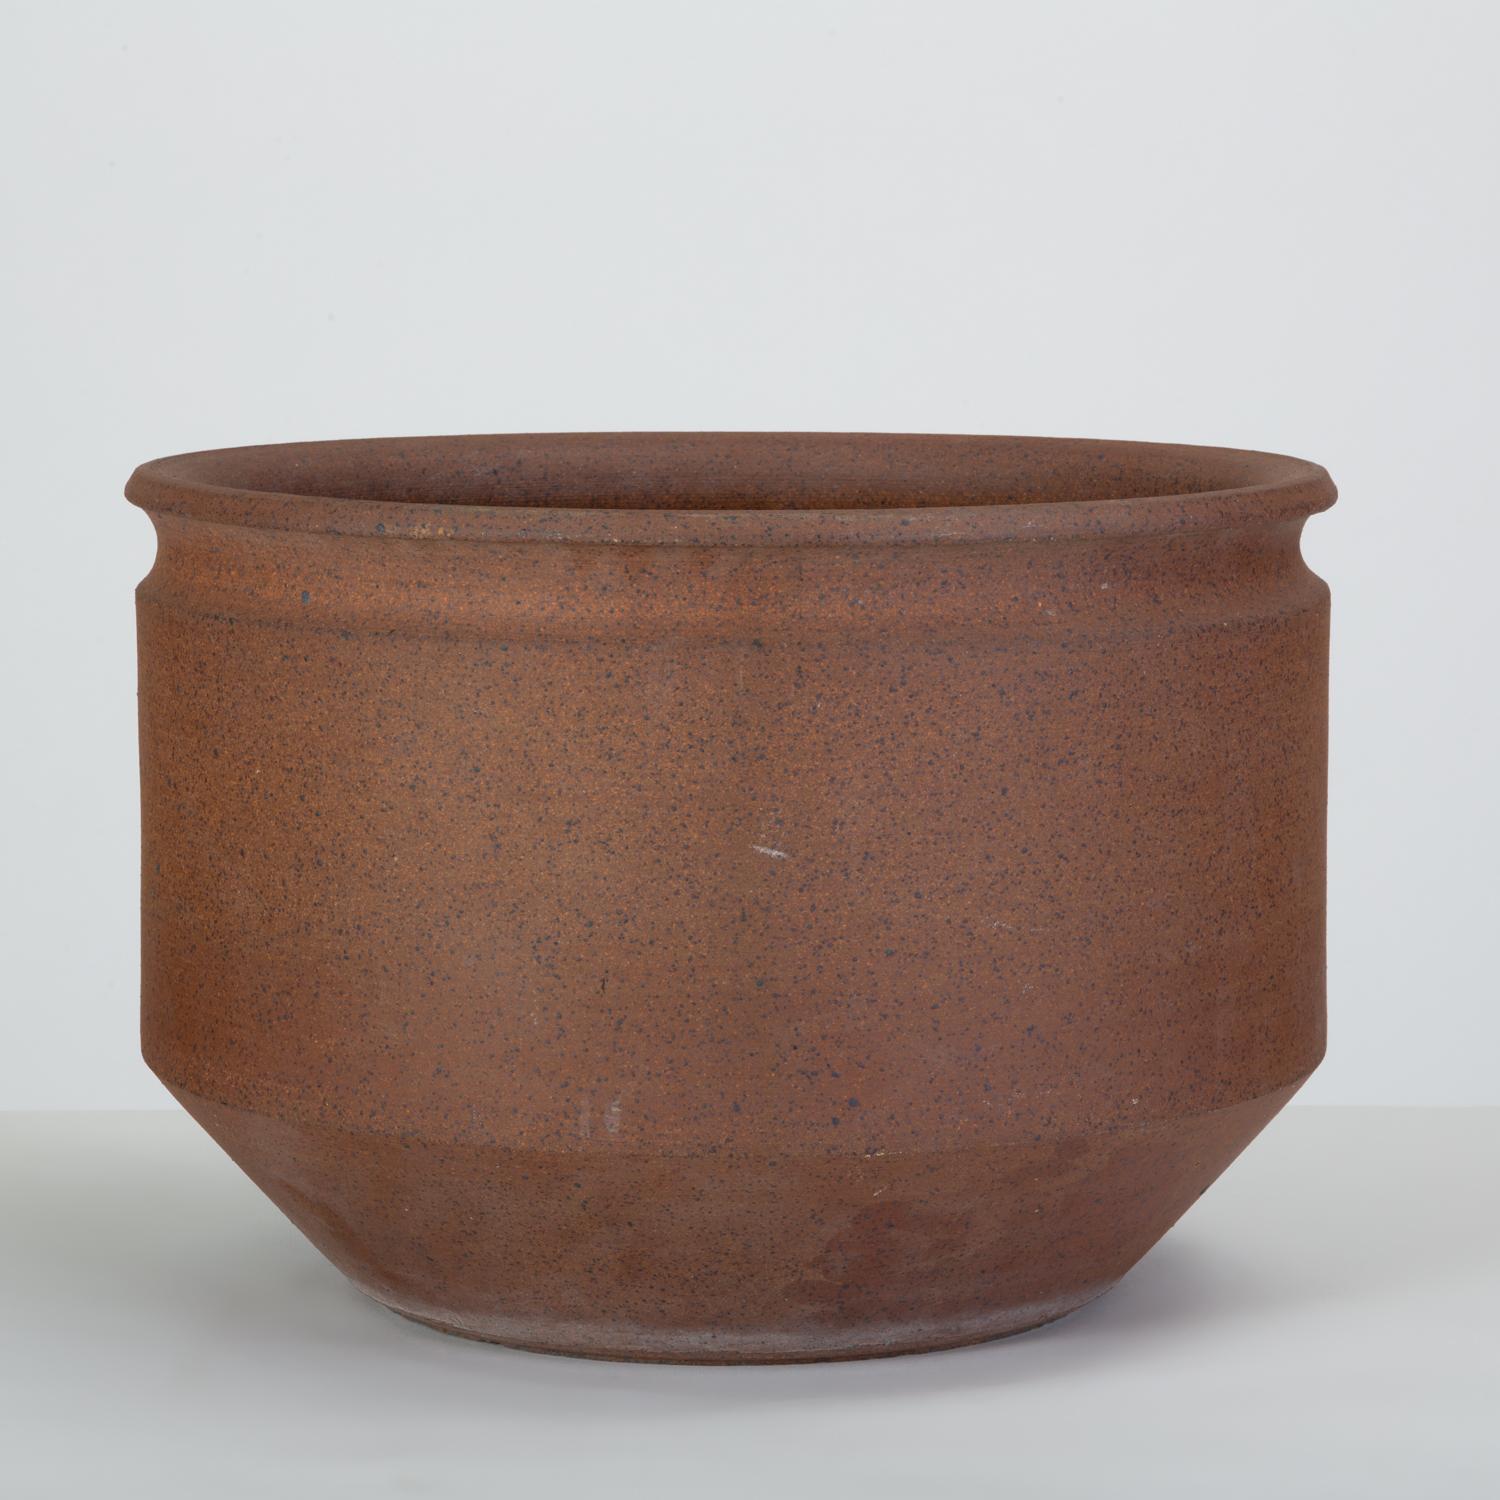 Unglazed Pair of Unscored Natural Stoneware Planters by David Cressey & Robert Maxwell